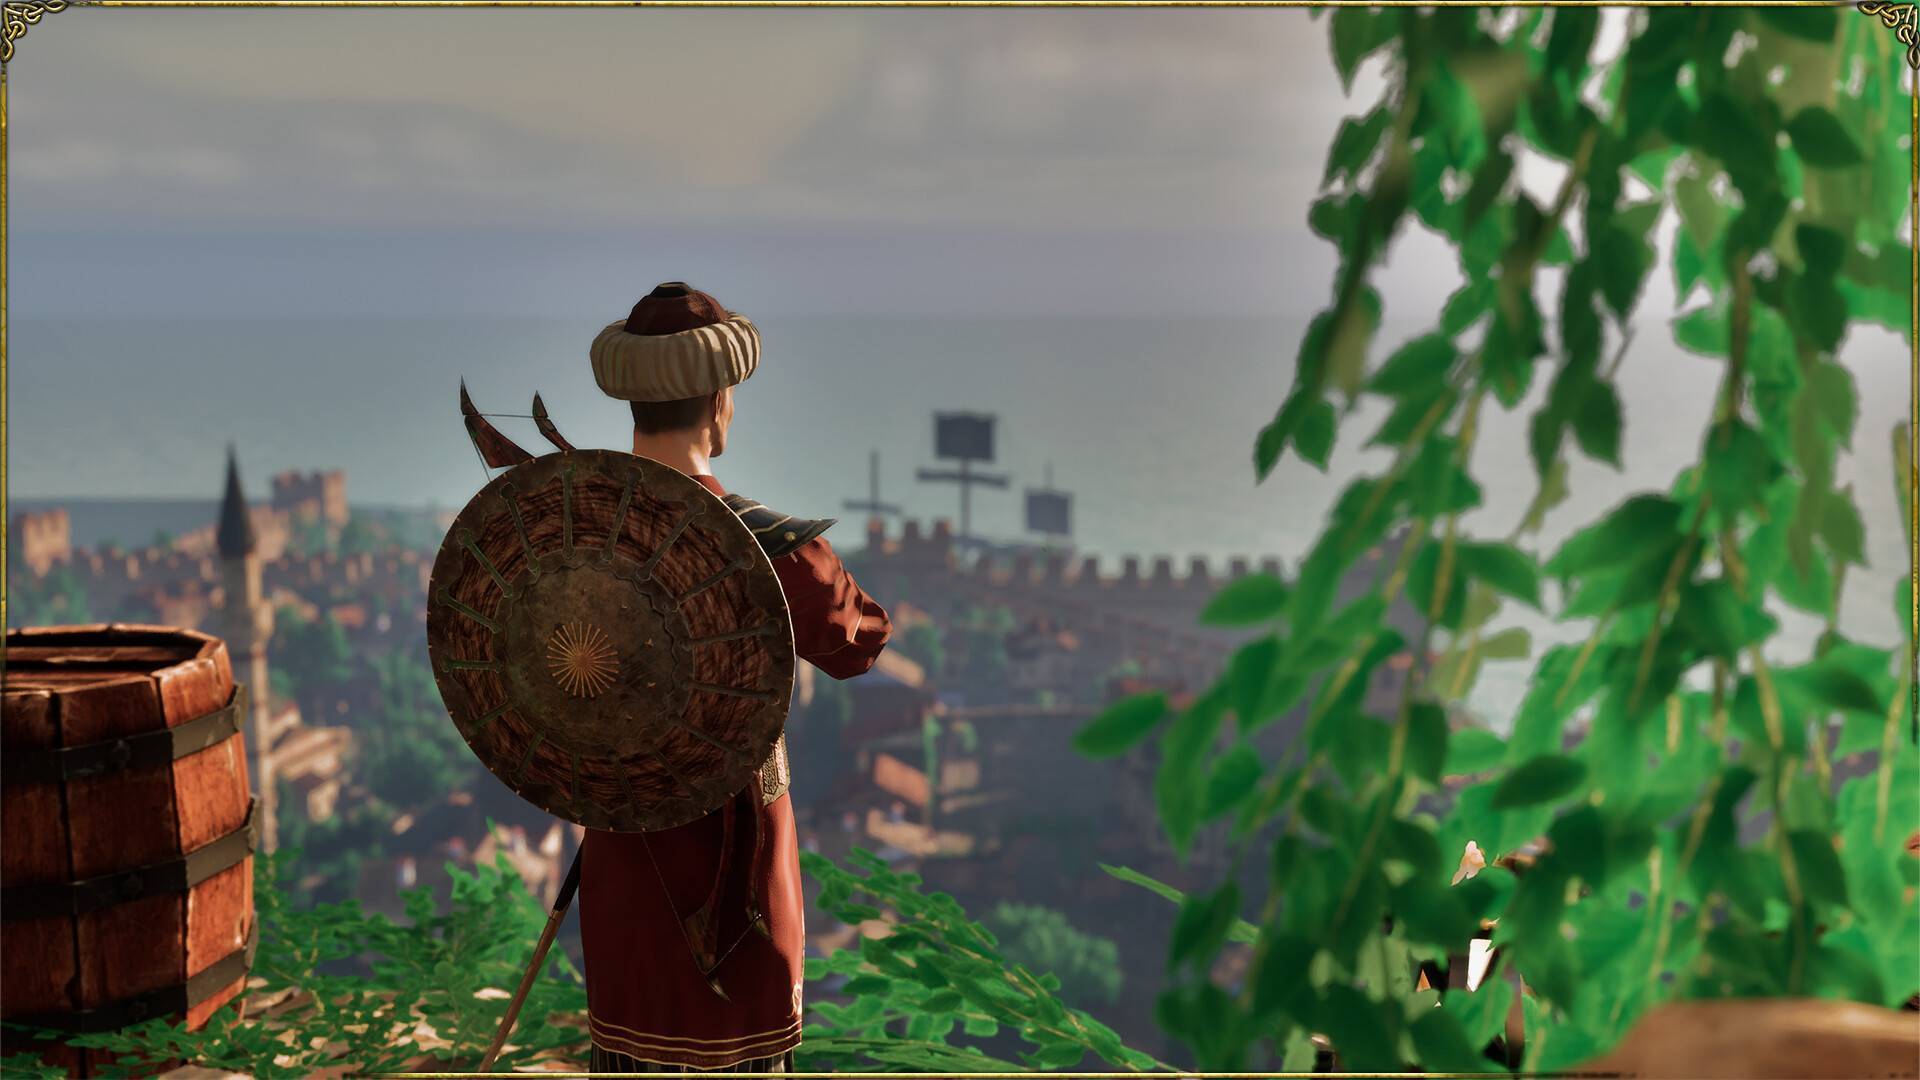 Compass of Destiny: Istanbul instaling